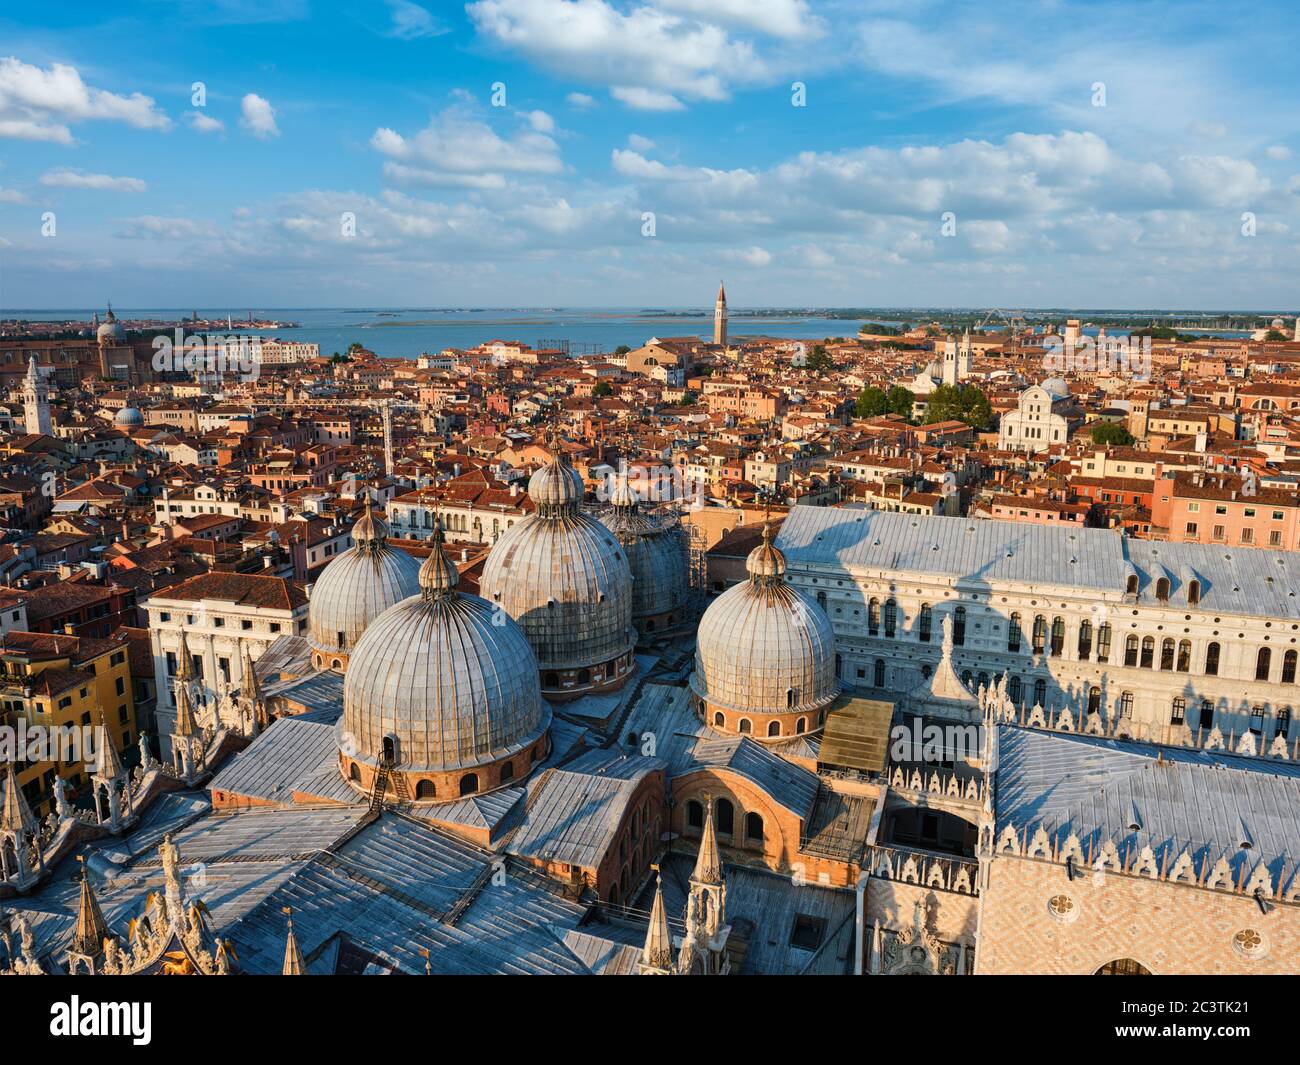 Aerial view of Venice with St Mark's Basilica and Doge's Palace. Venice, Italy Stock Photo